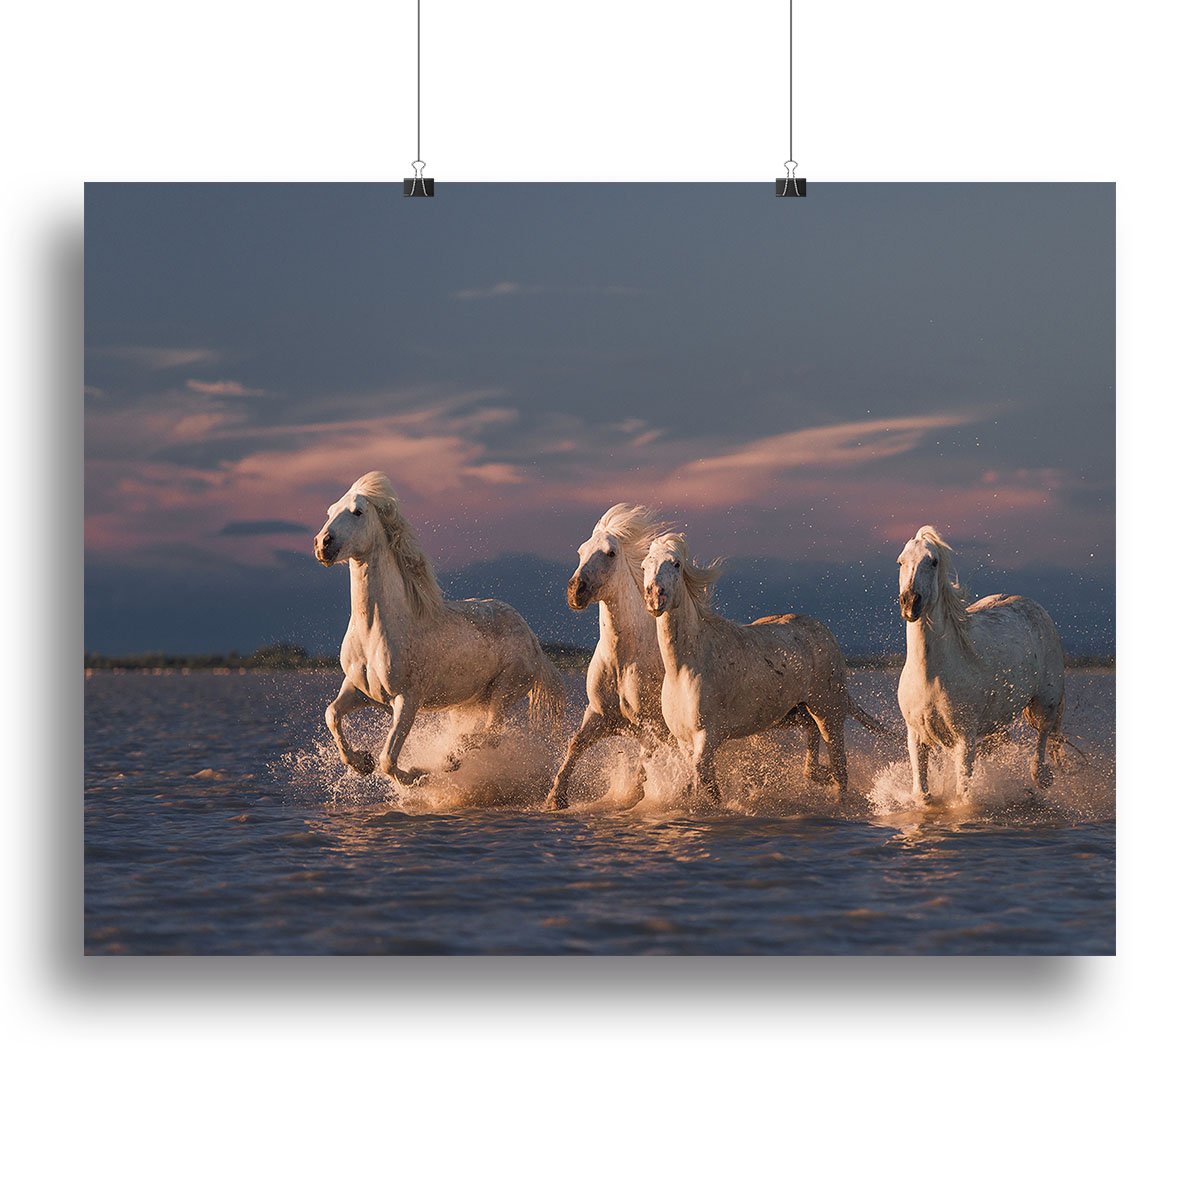 Wite Horses Running In Water 2 Canvas Print or Poster - Canvas Art Rocks - 2